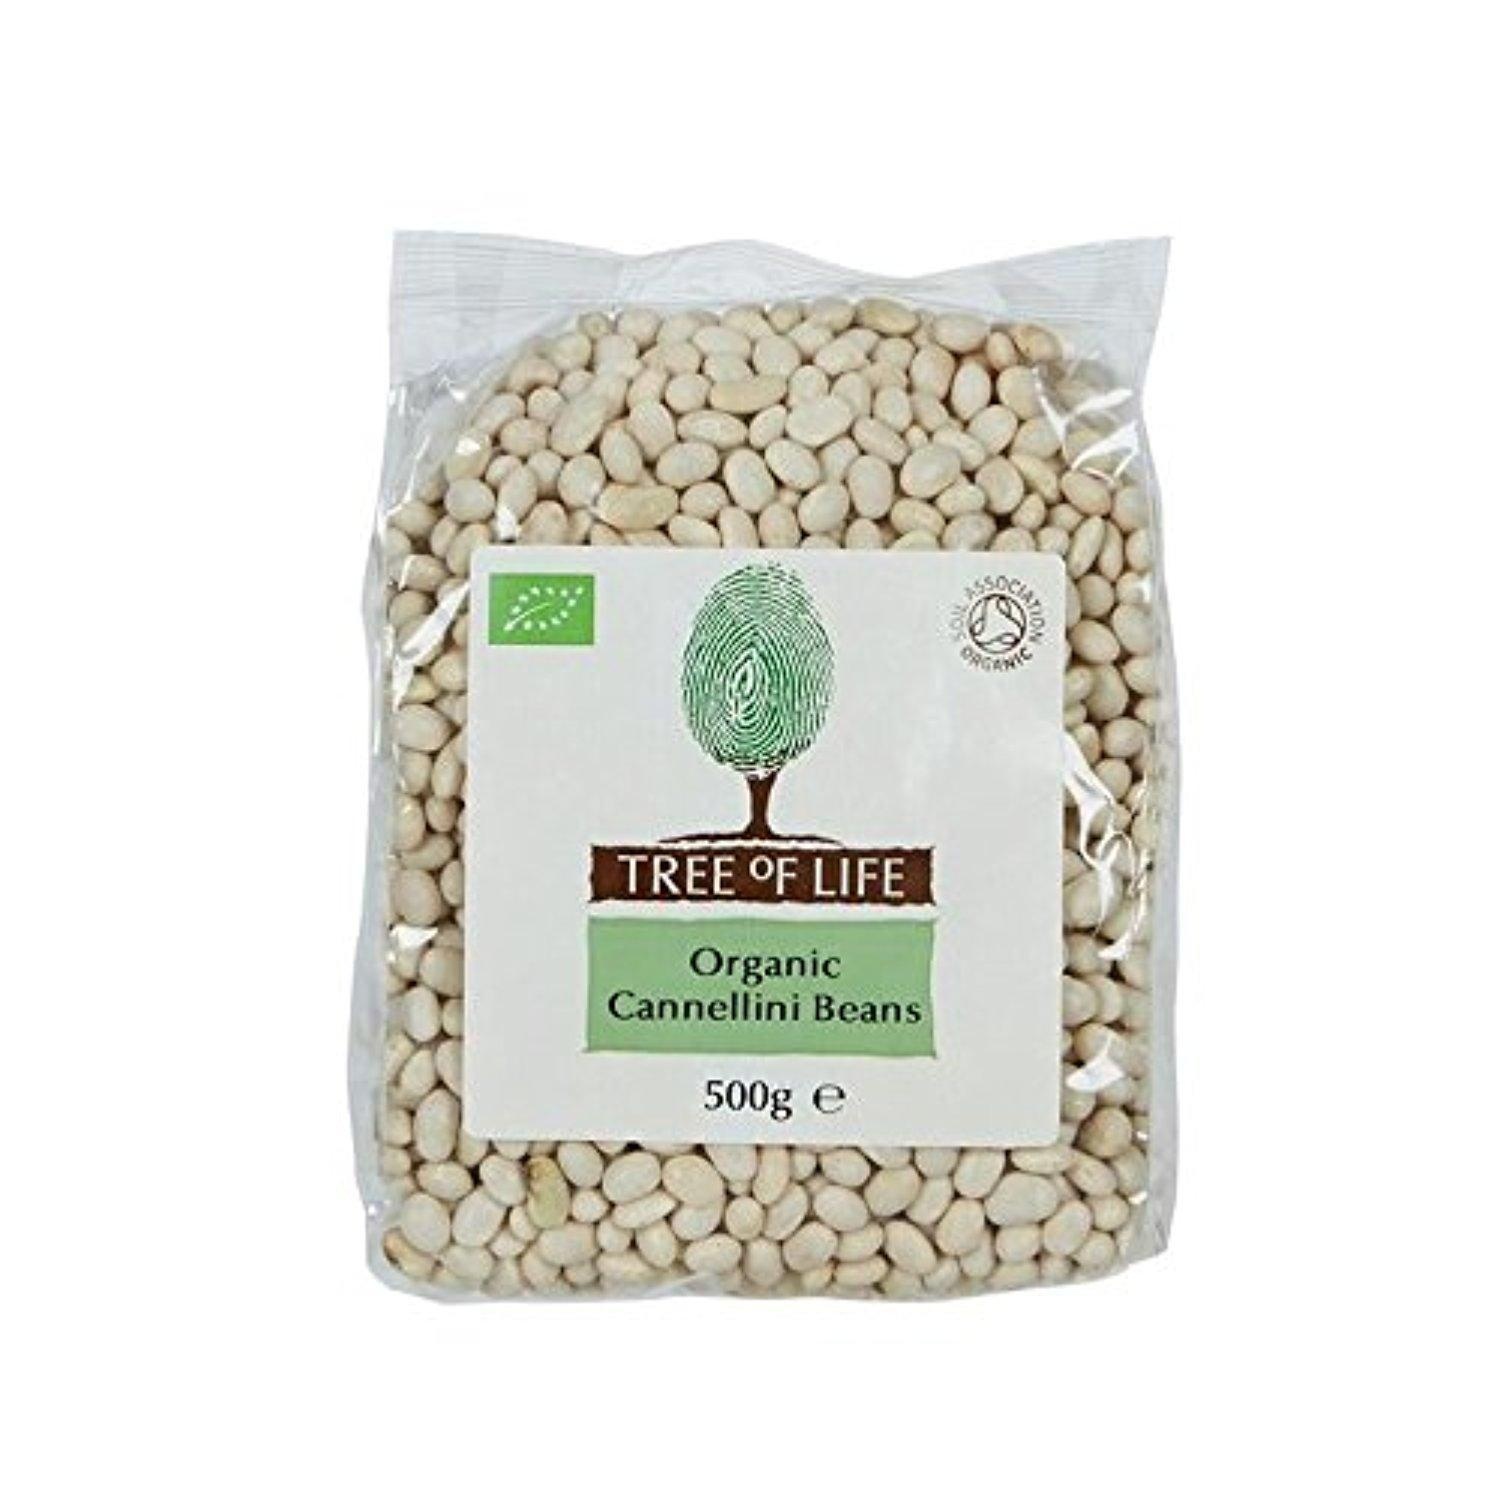 Tree of Life Organic Cannellini Beans 500g - Pack of 2